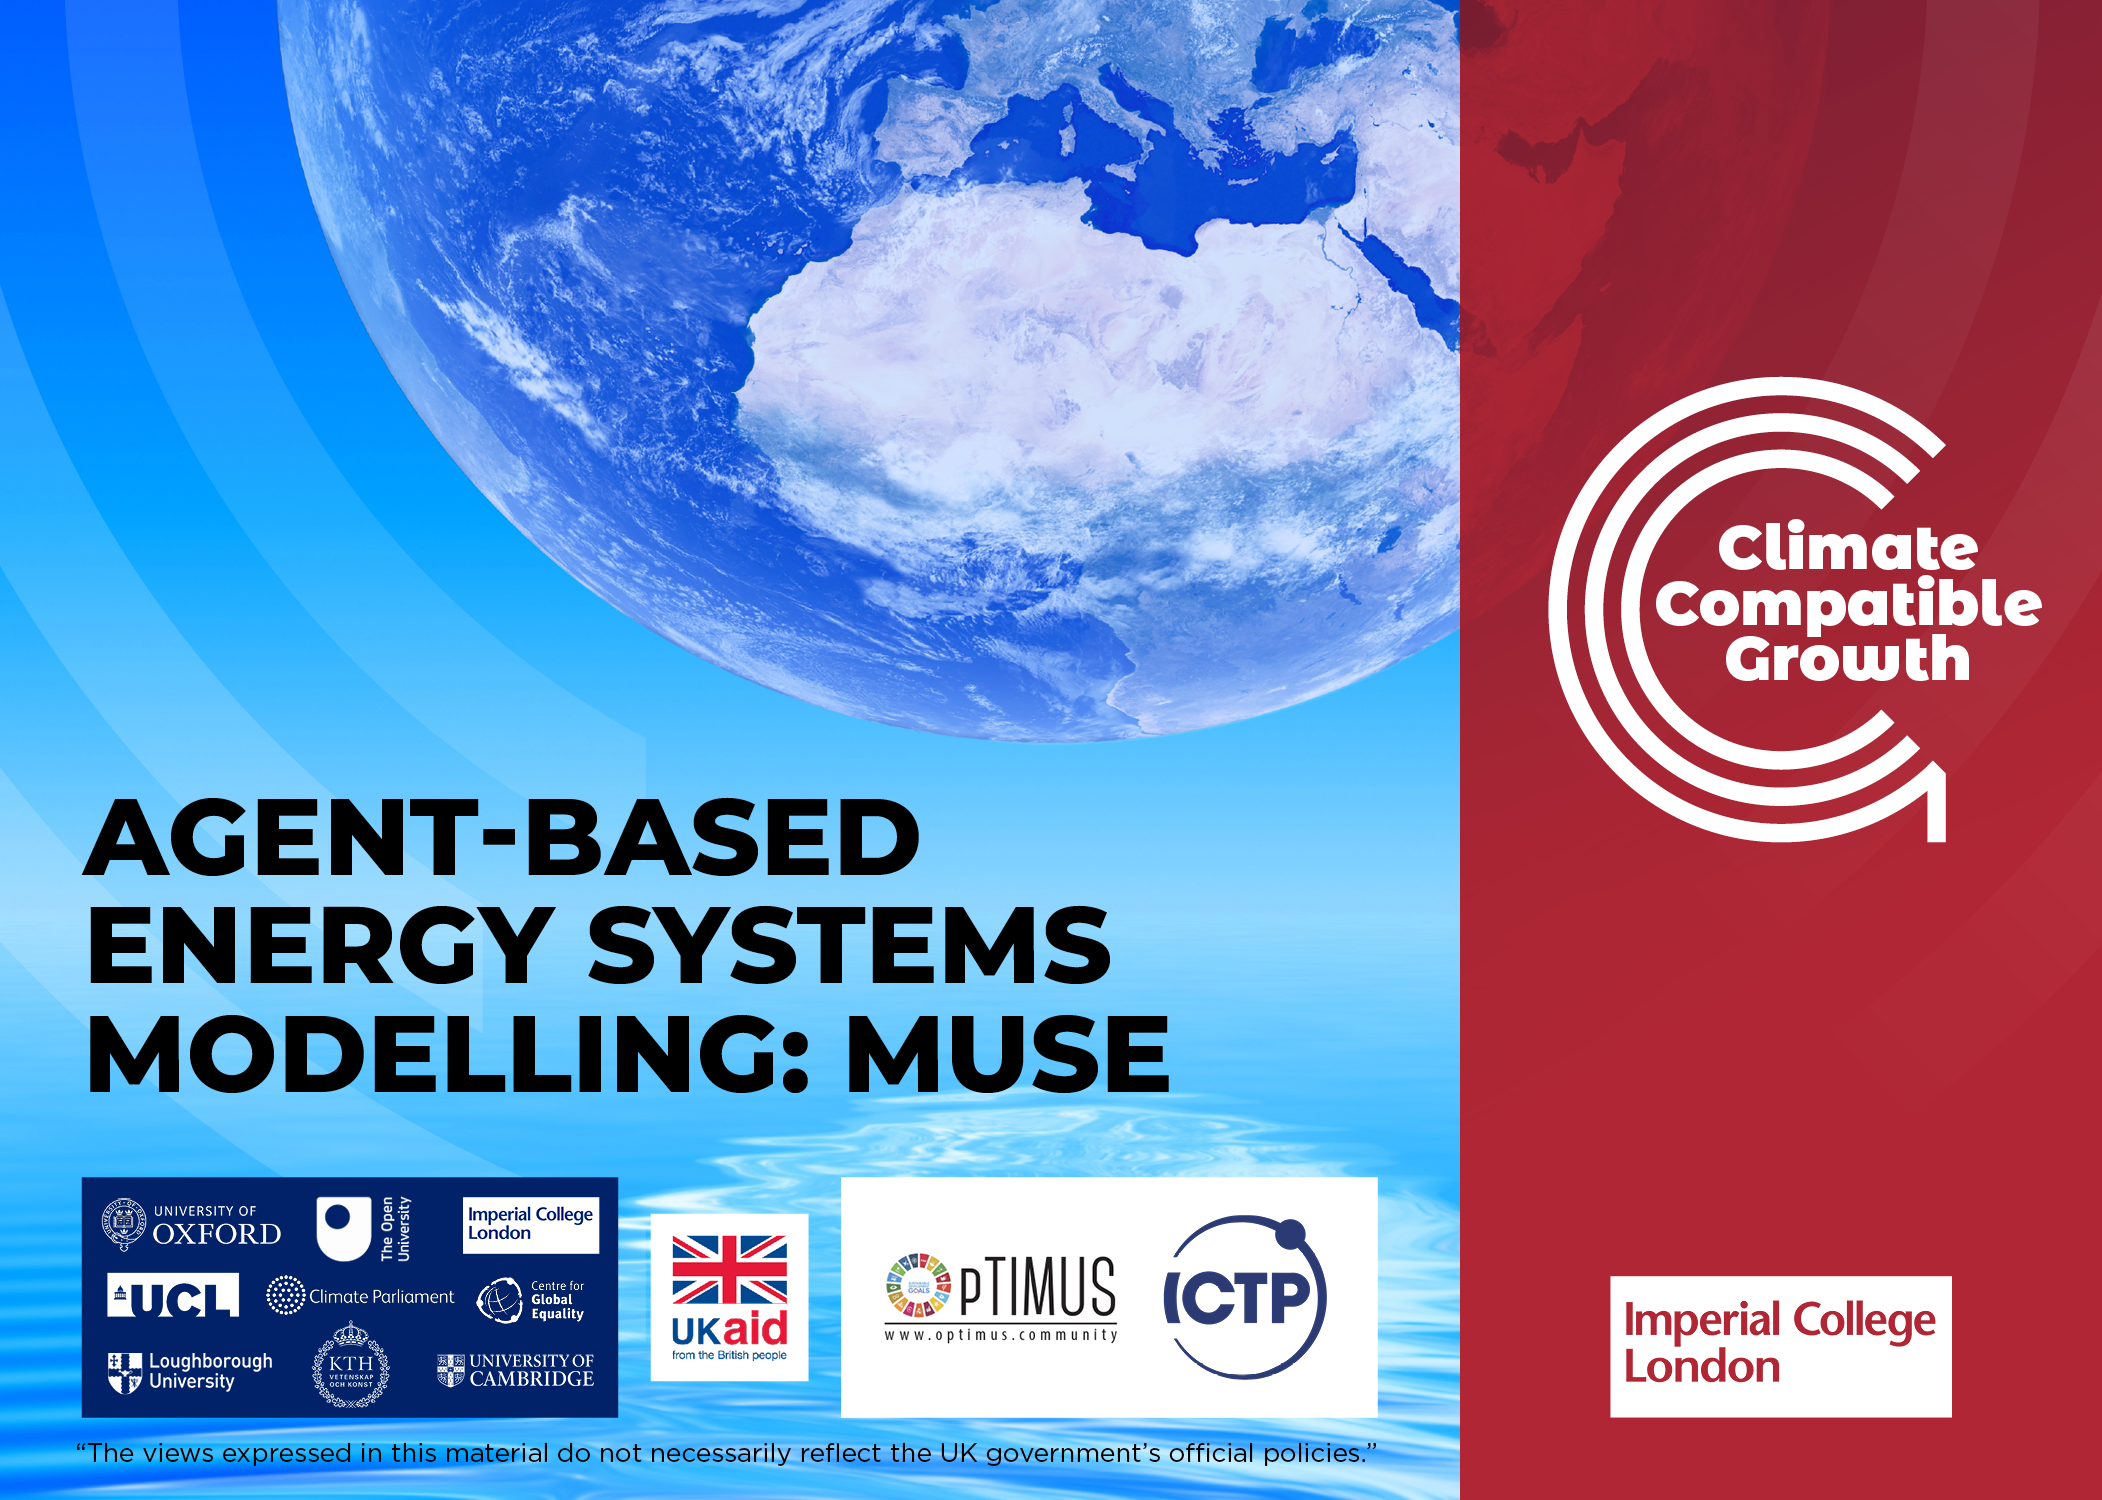 Agent-based energy systems modelling: MUSE